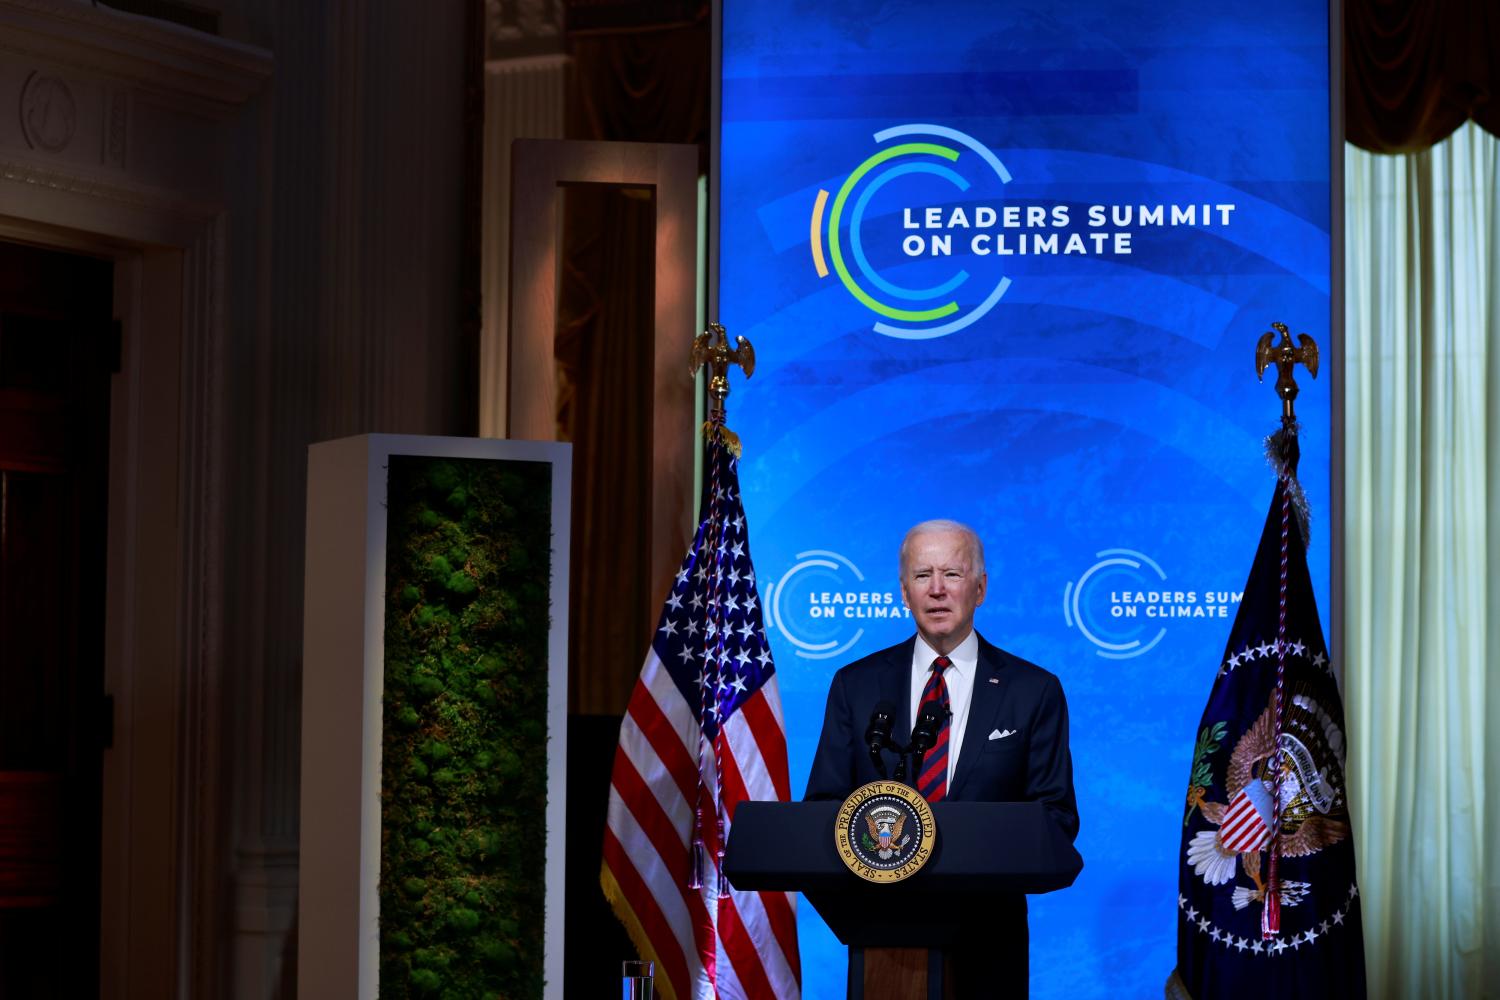 U.S. President Joe Biden participates in a virtual Climate Summit with world leaders in the East Room at the White House in Washington, U.S., April 22, 2021. REUTERS/Tom Brenner